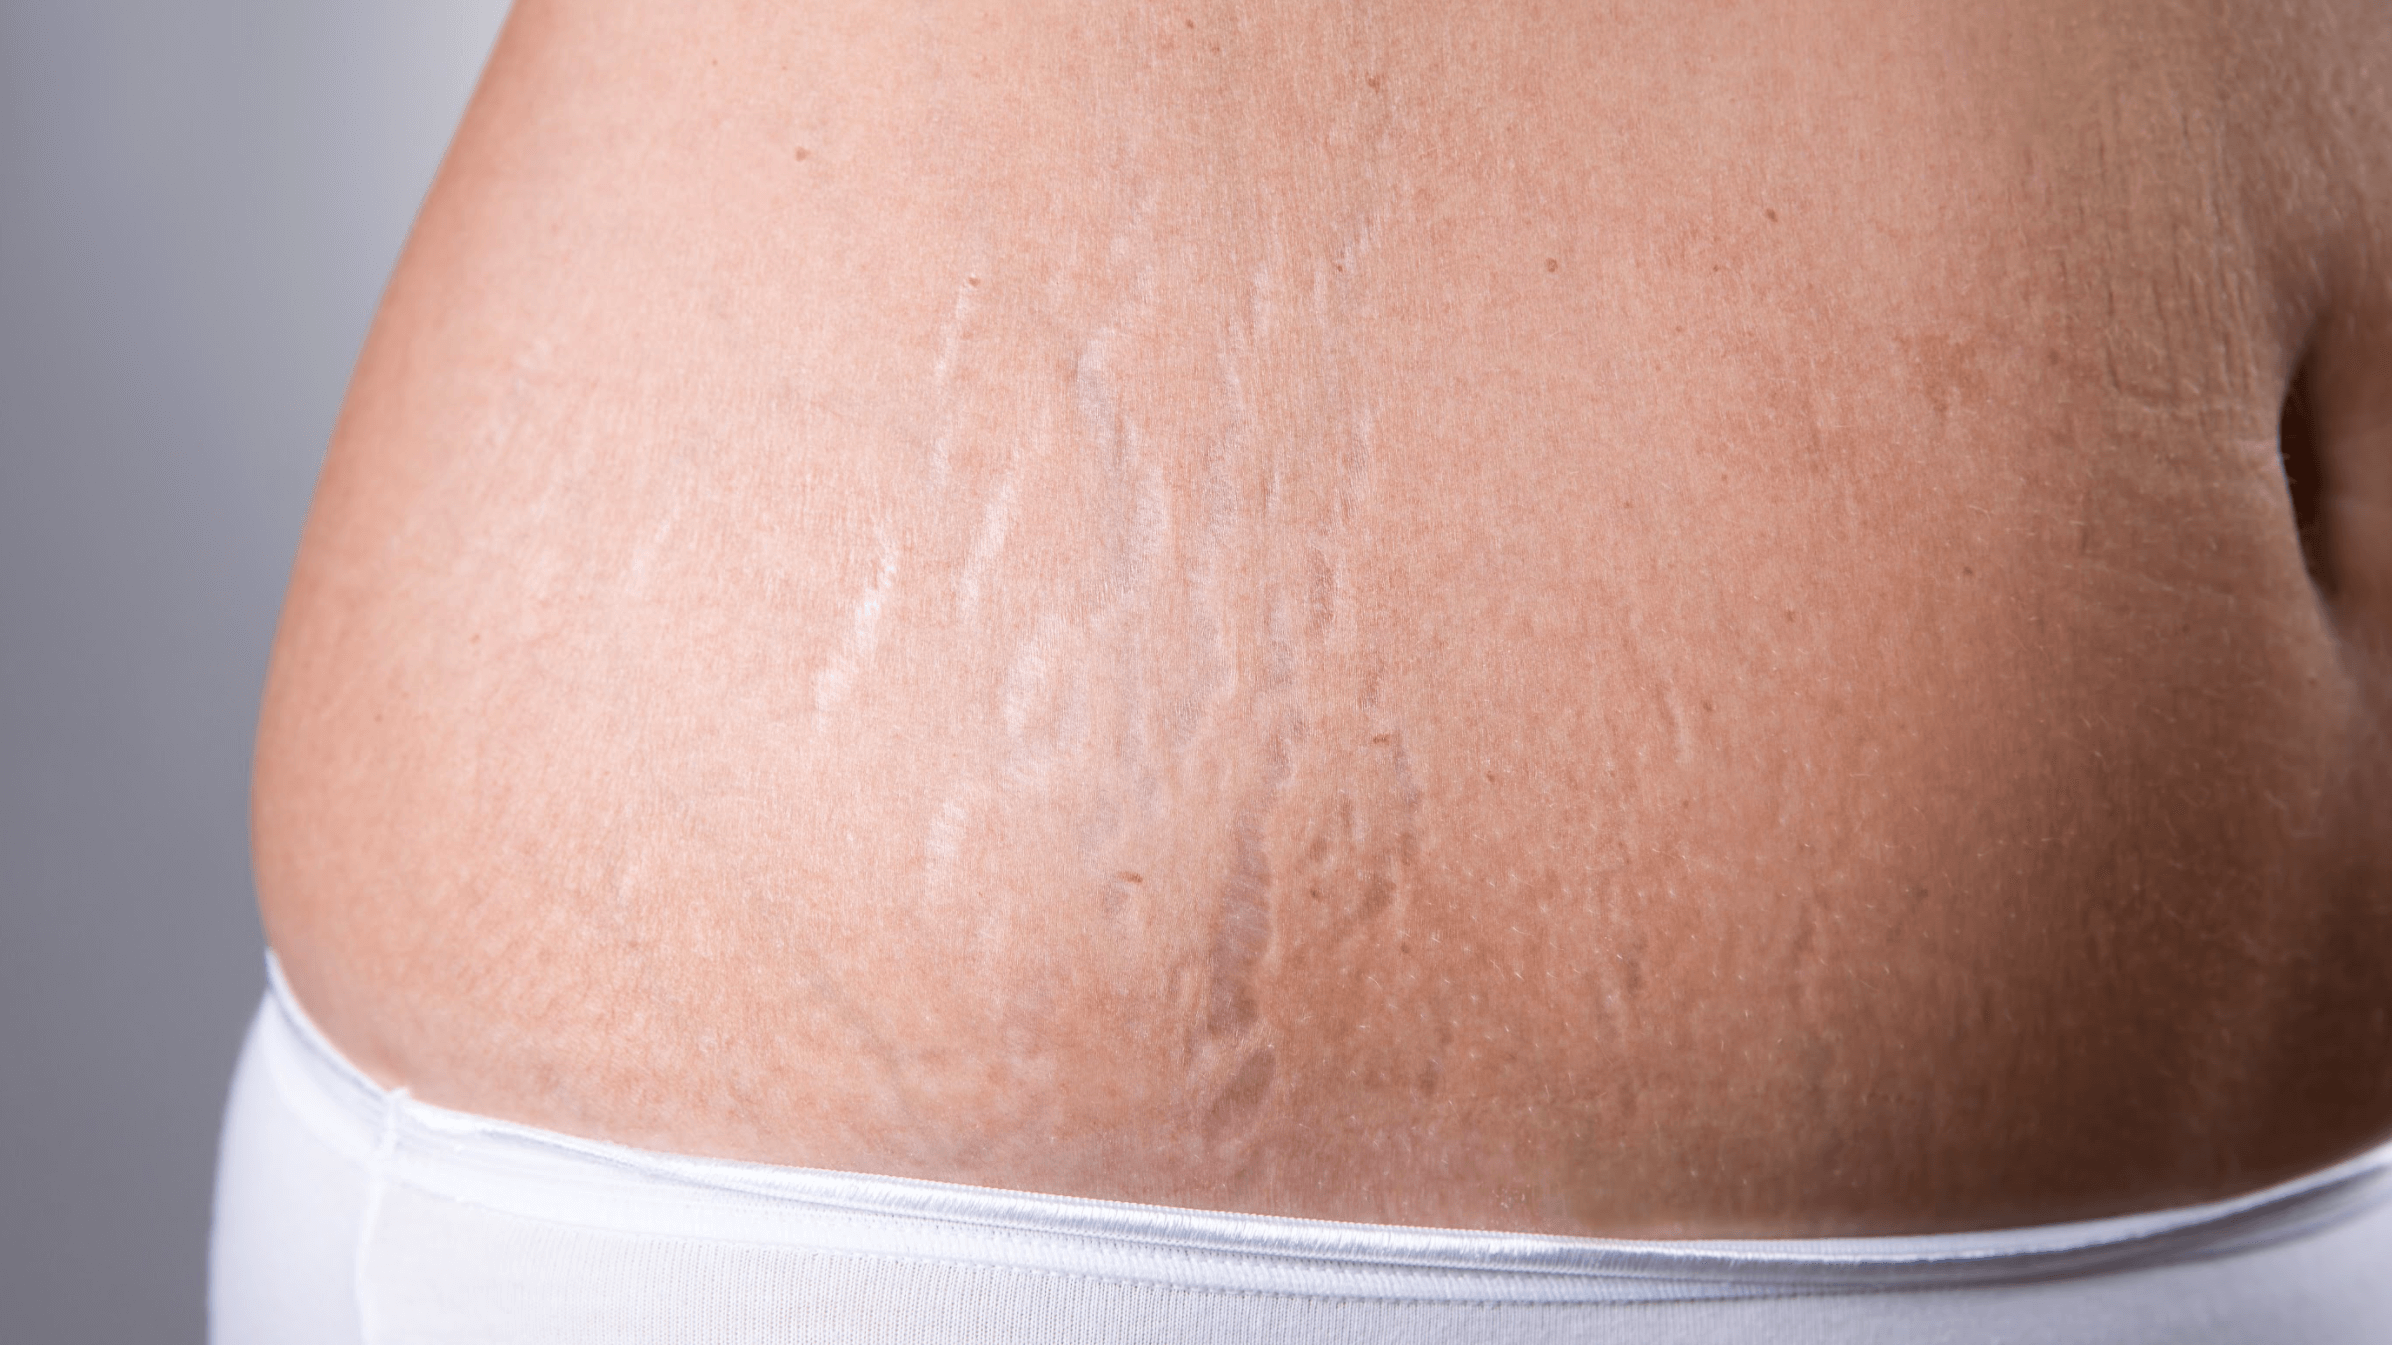 An Overweight Plus-size Woman with Stretch Marks on Her Skin